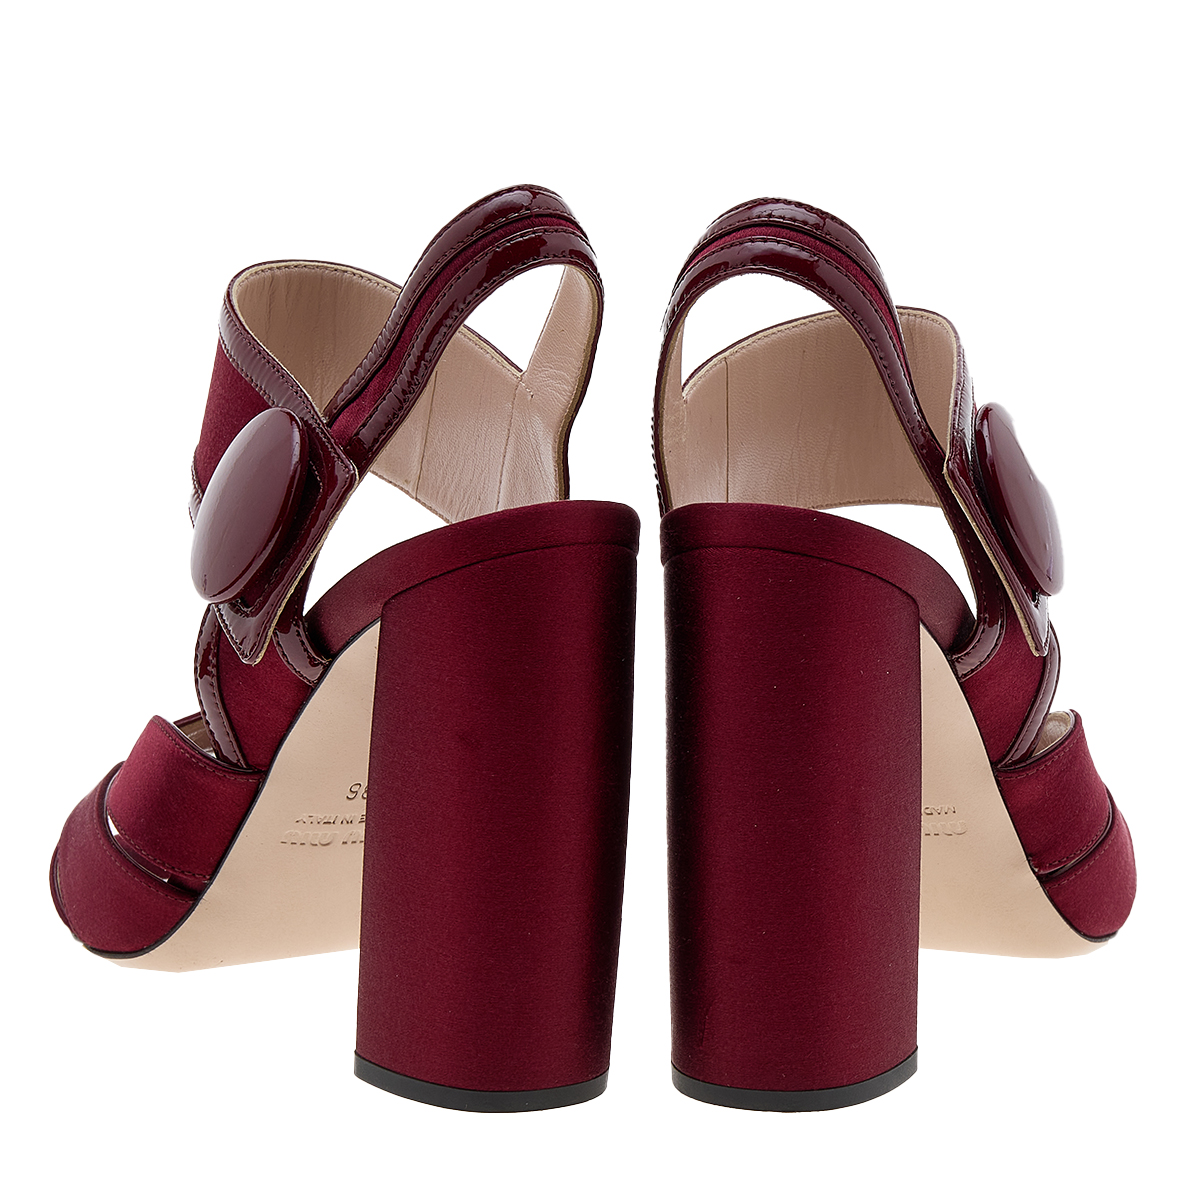 Miu Miu Burgundy Satin And Patent Leather Ankle Strap Sandals Size 36